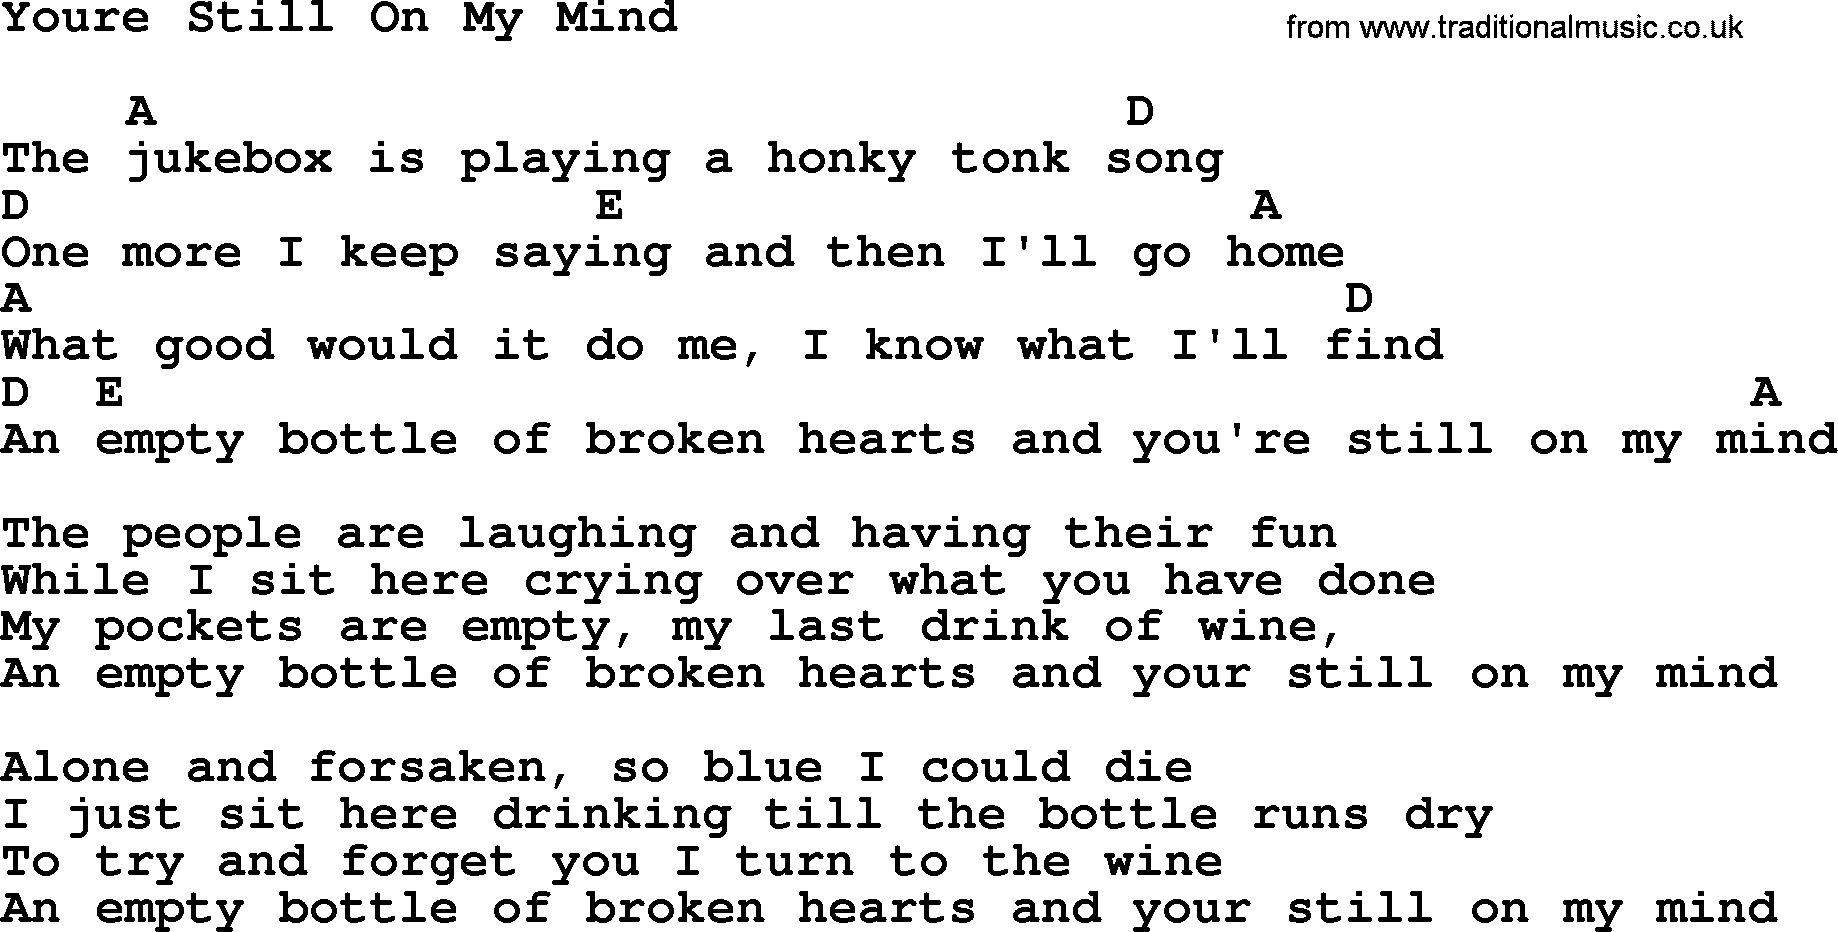 George Jones song: Youre Still On My Mind, lyrics and chords